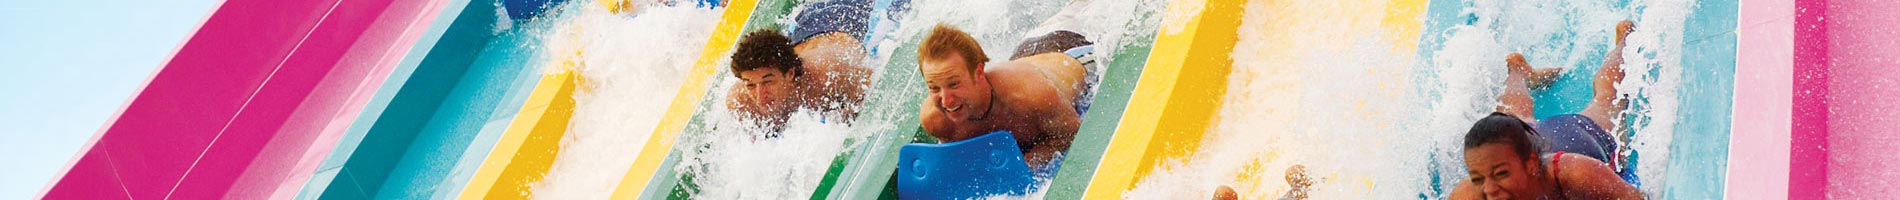 Race your friends on the thrilling Taumata Racer at Aquatica